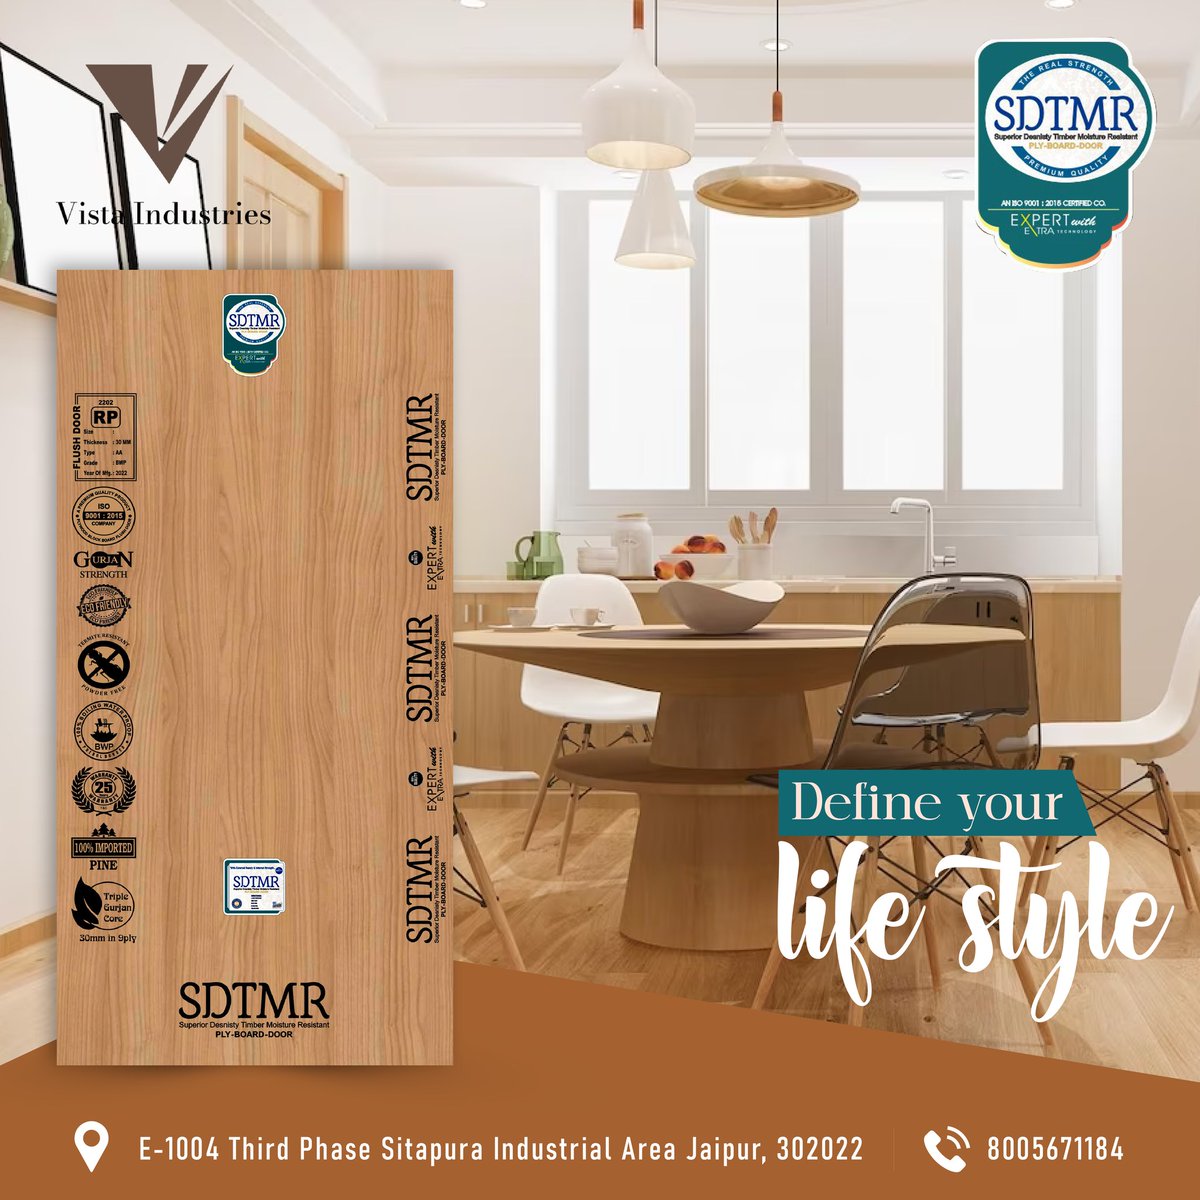 Add strength and durability to your interiors with natural wood plywood that adds a captivating allure to your decor.
SDTMR ensures sustainability with termite resistance plywood so that you and your family can enjoy a healthy home.
Visit Vista Industries to explore more.